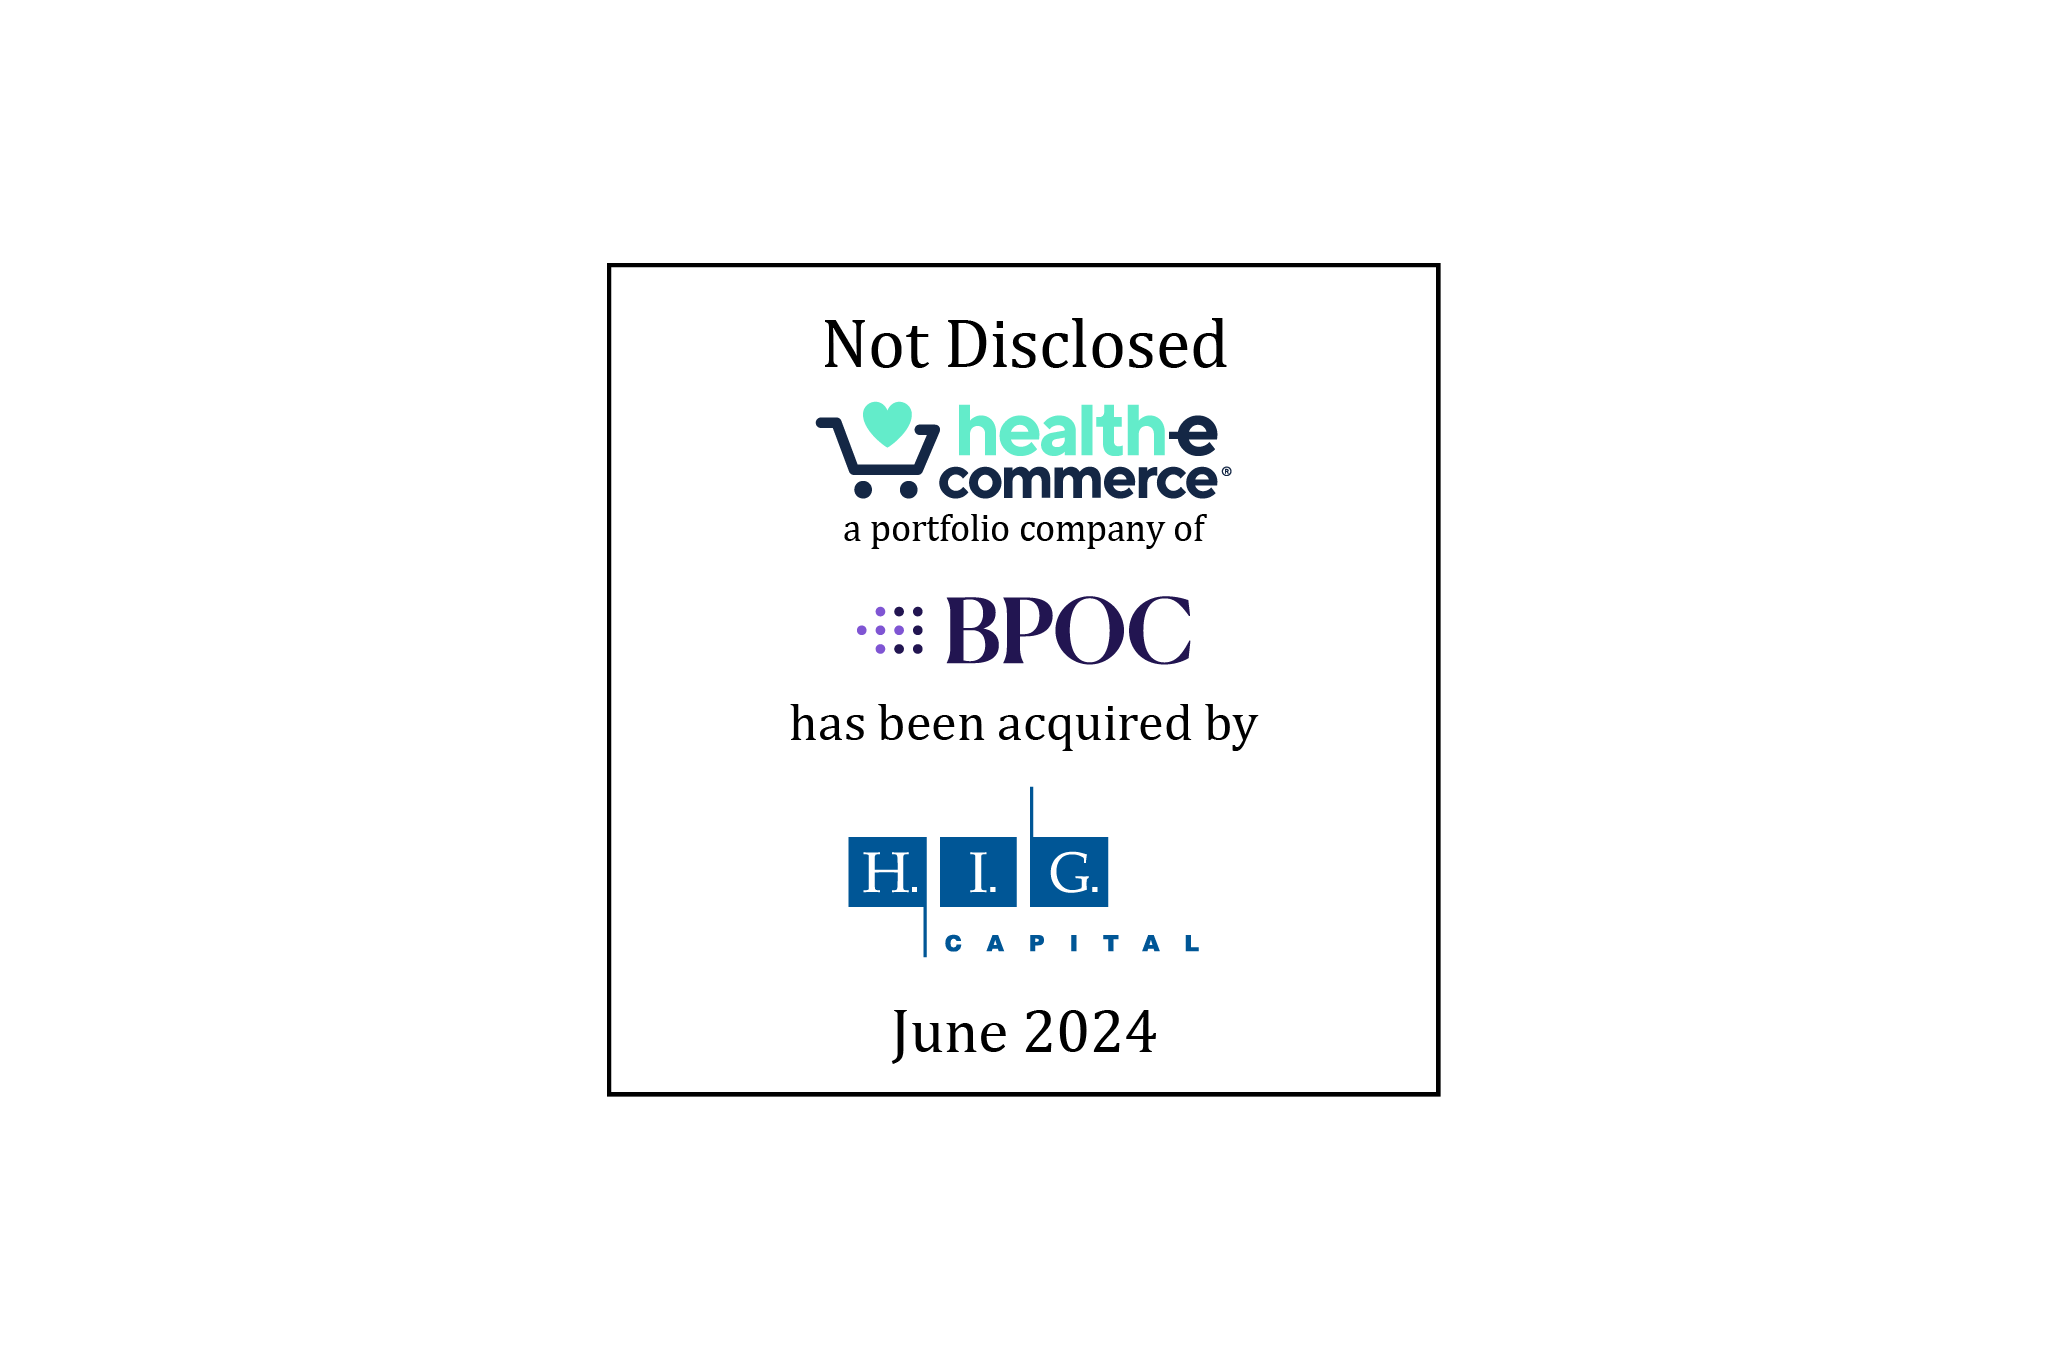 Not Disclosed | Health-E Commerce (logo), a portfolio company of Beeken, Petty, O’Keefe, and Company (logo), has Been Acquired by H.I.G. Capital (logo) | June 2024